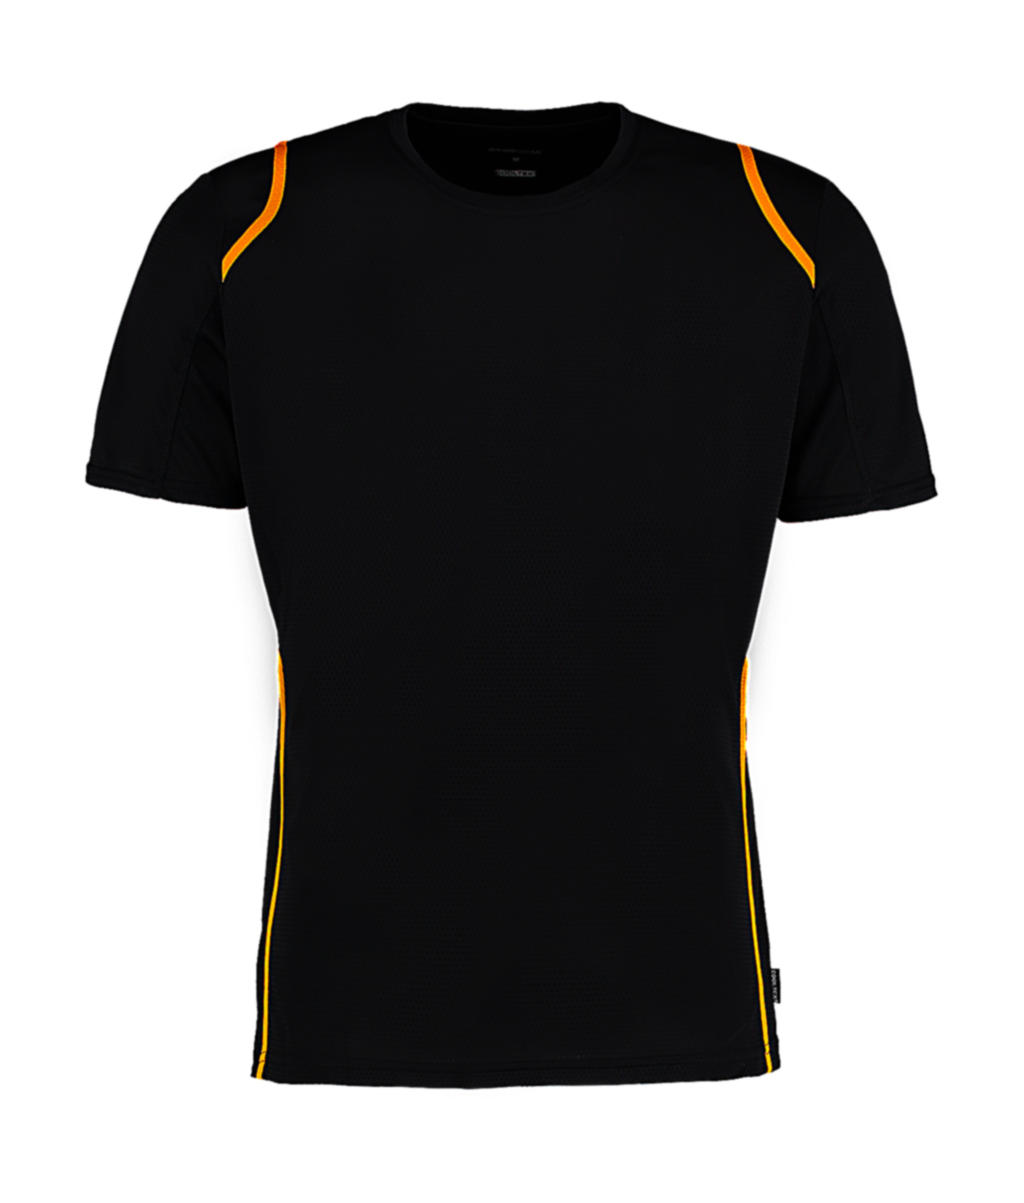  Regular Fit Cooltex? Contrast Tee in Farbe Black/Gold